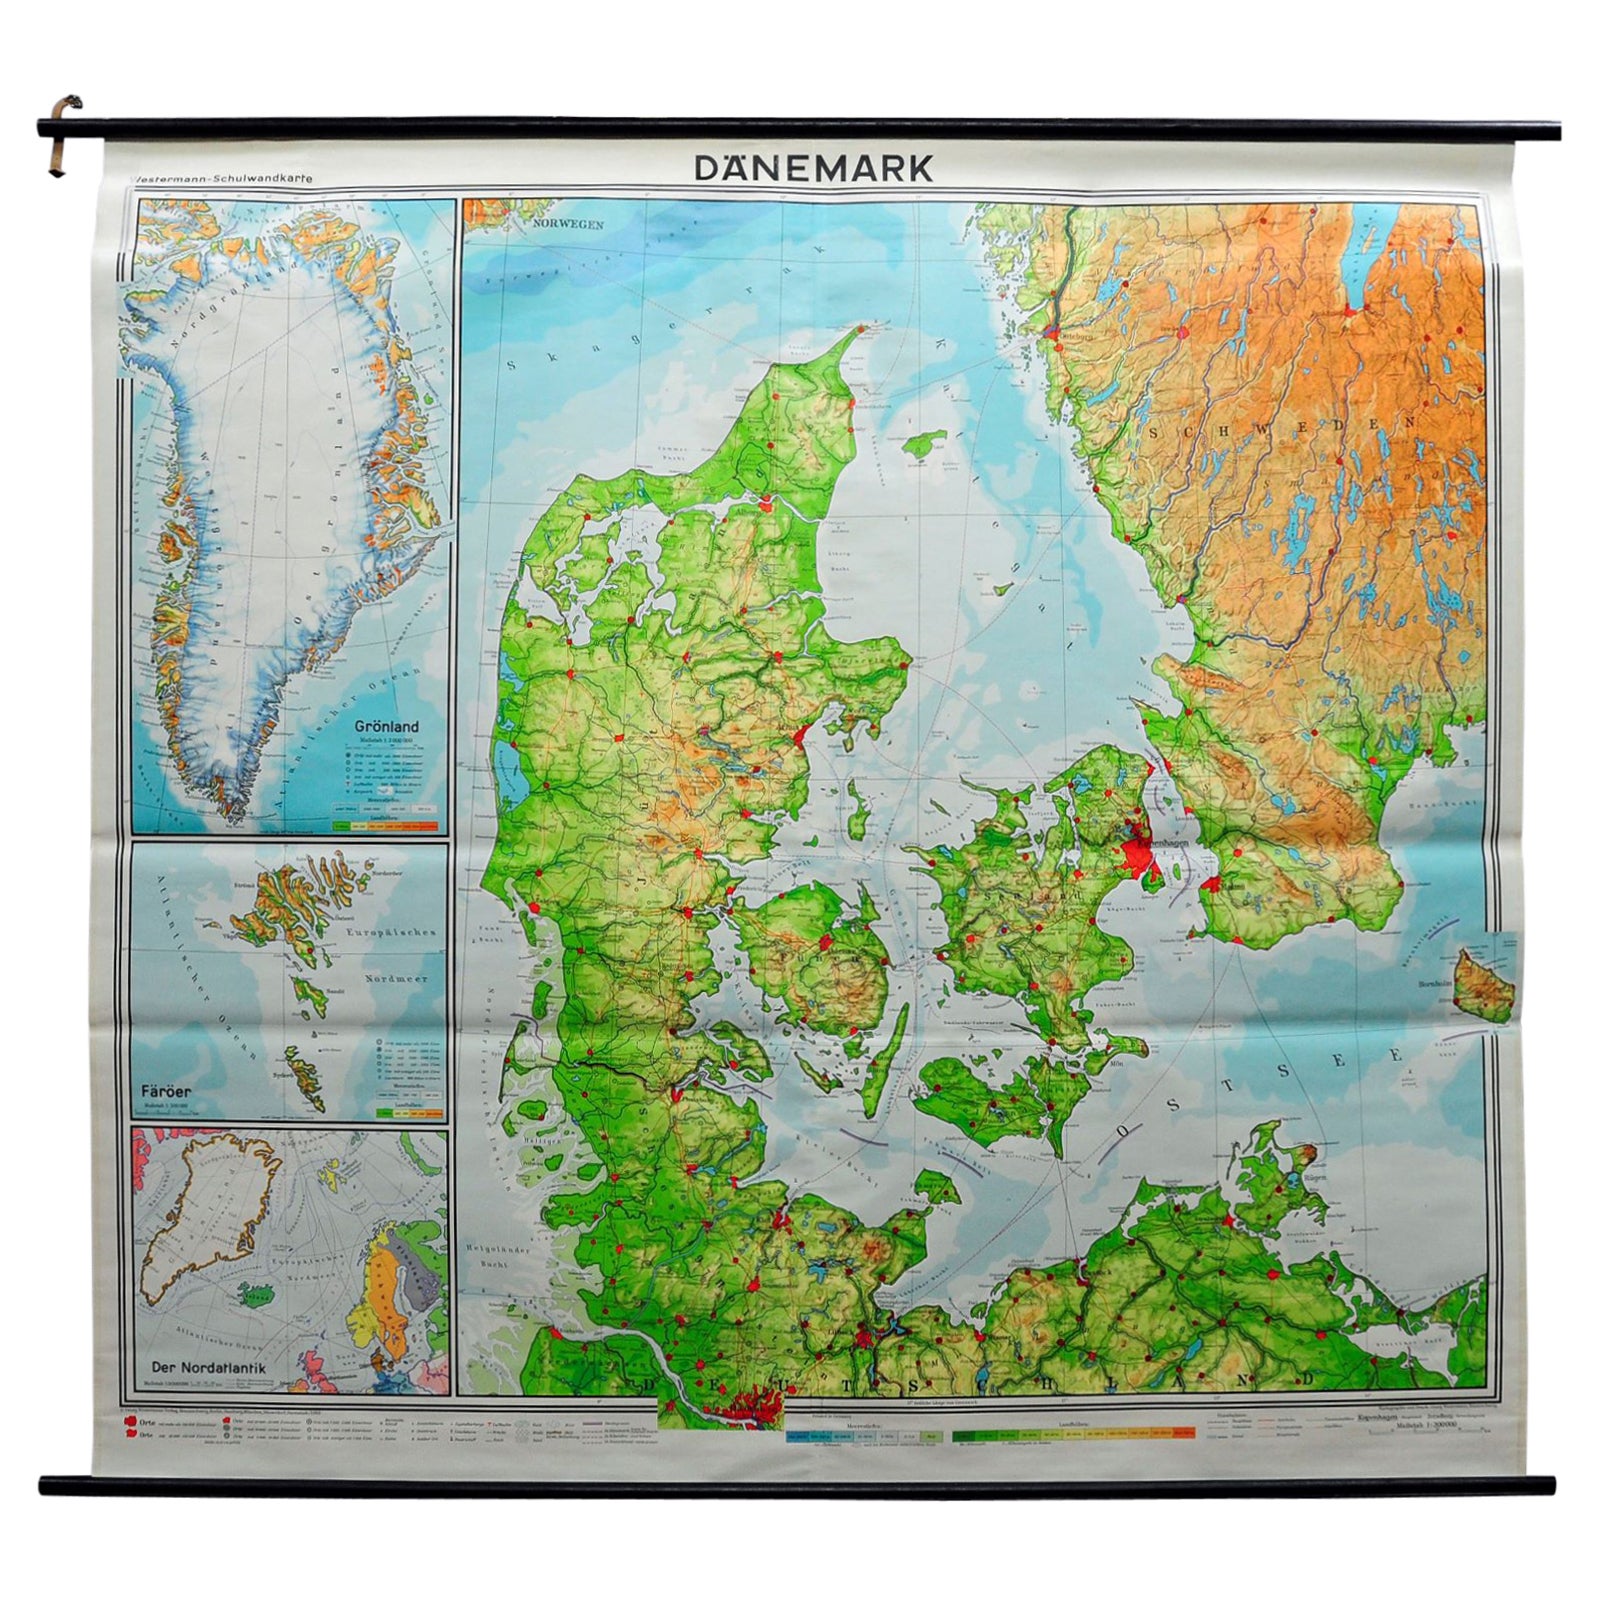 Denmark Greenland Faroe Islands the North Atlantic Vintage Mural Map Wall Chart For Sale